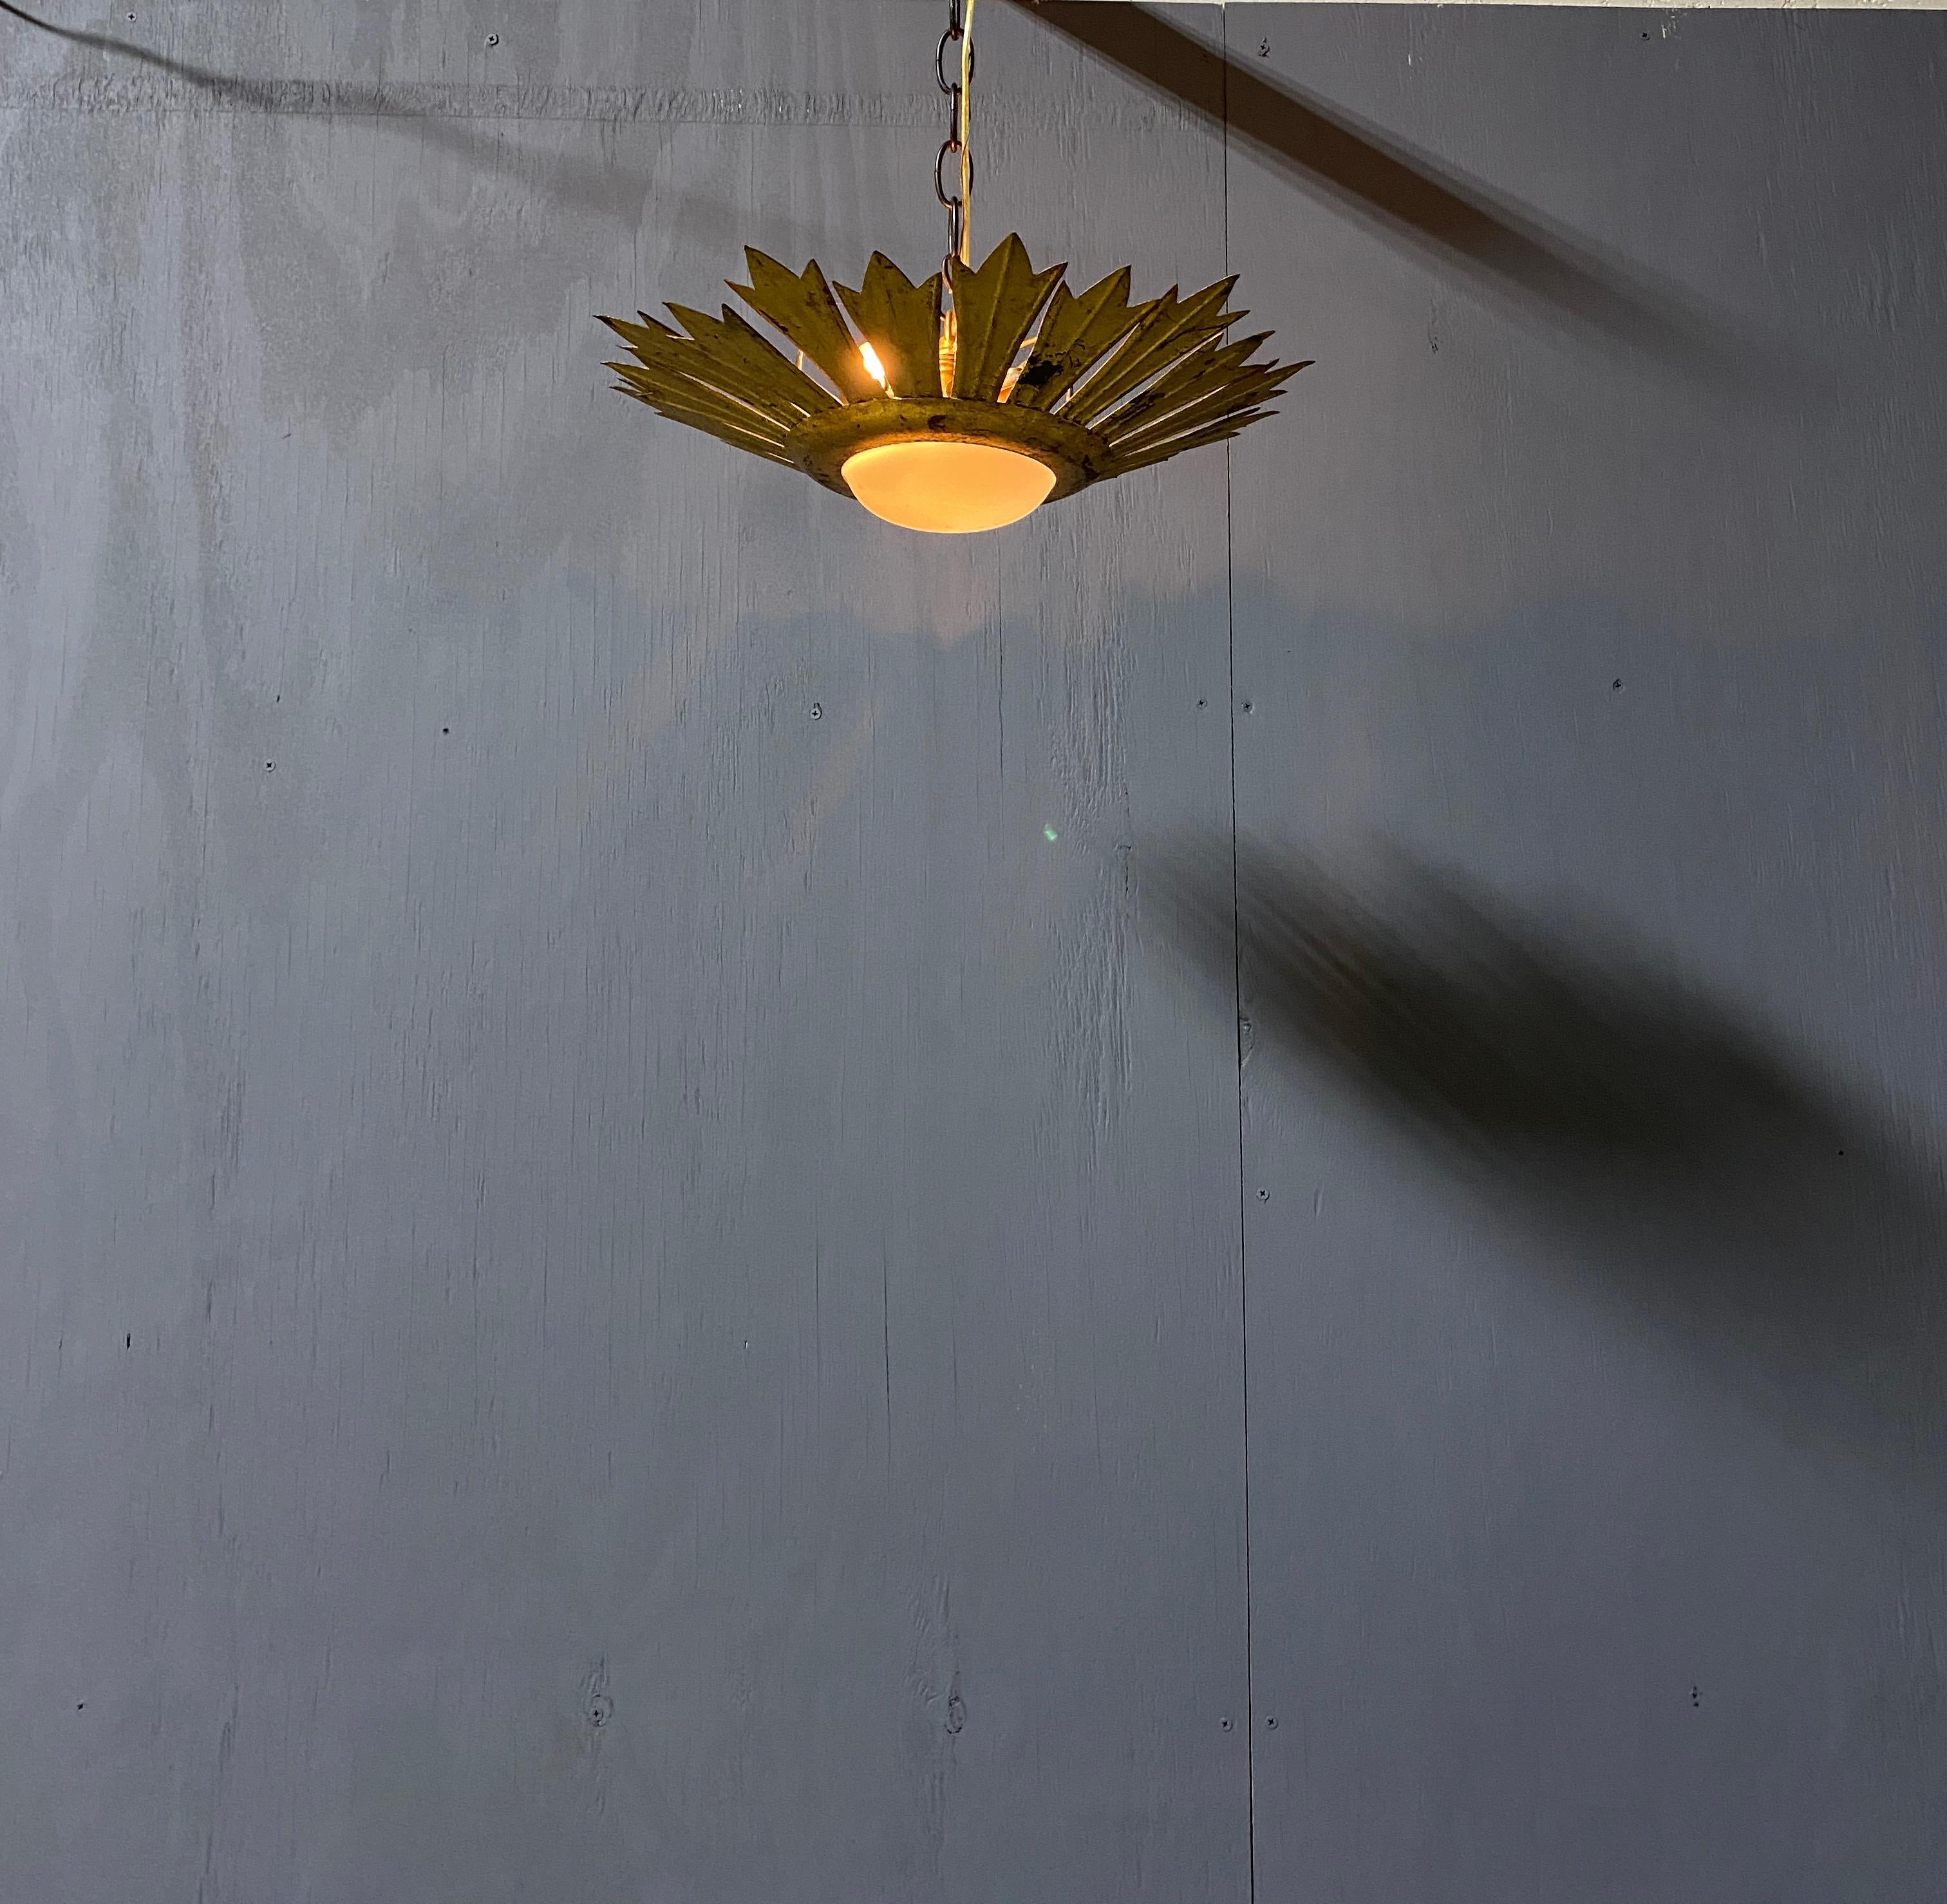 Gilt Metal Sunburst Ceiling Fixture with Convex Opaline Globe In Good Condition For Sale In Buchanan, NY